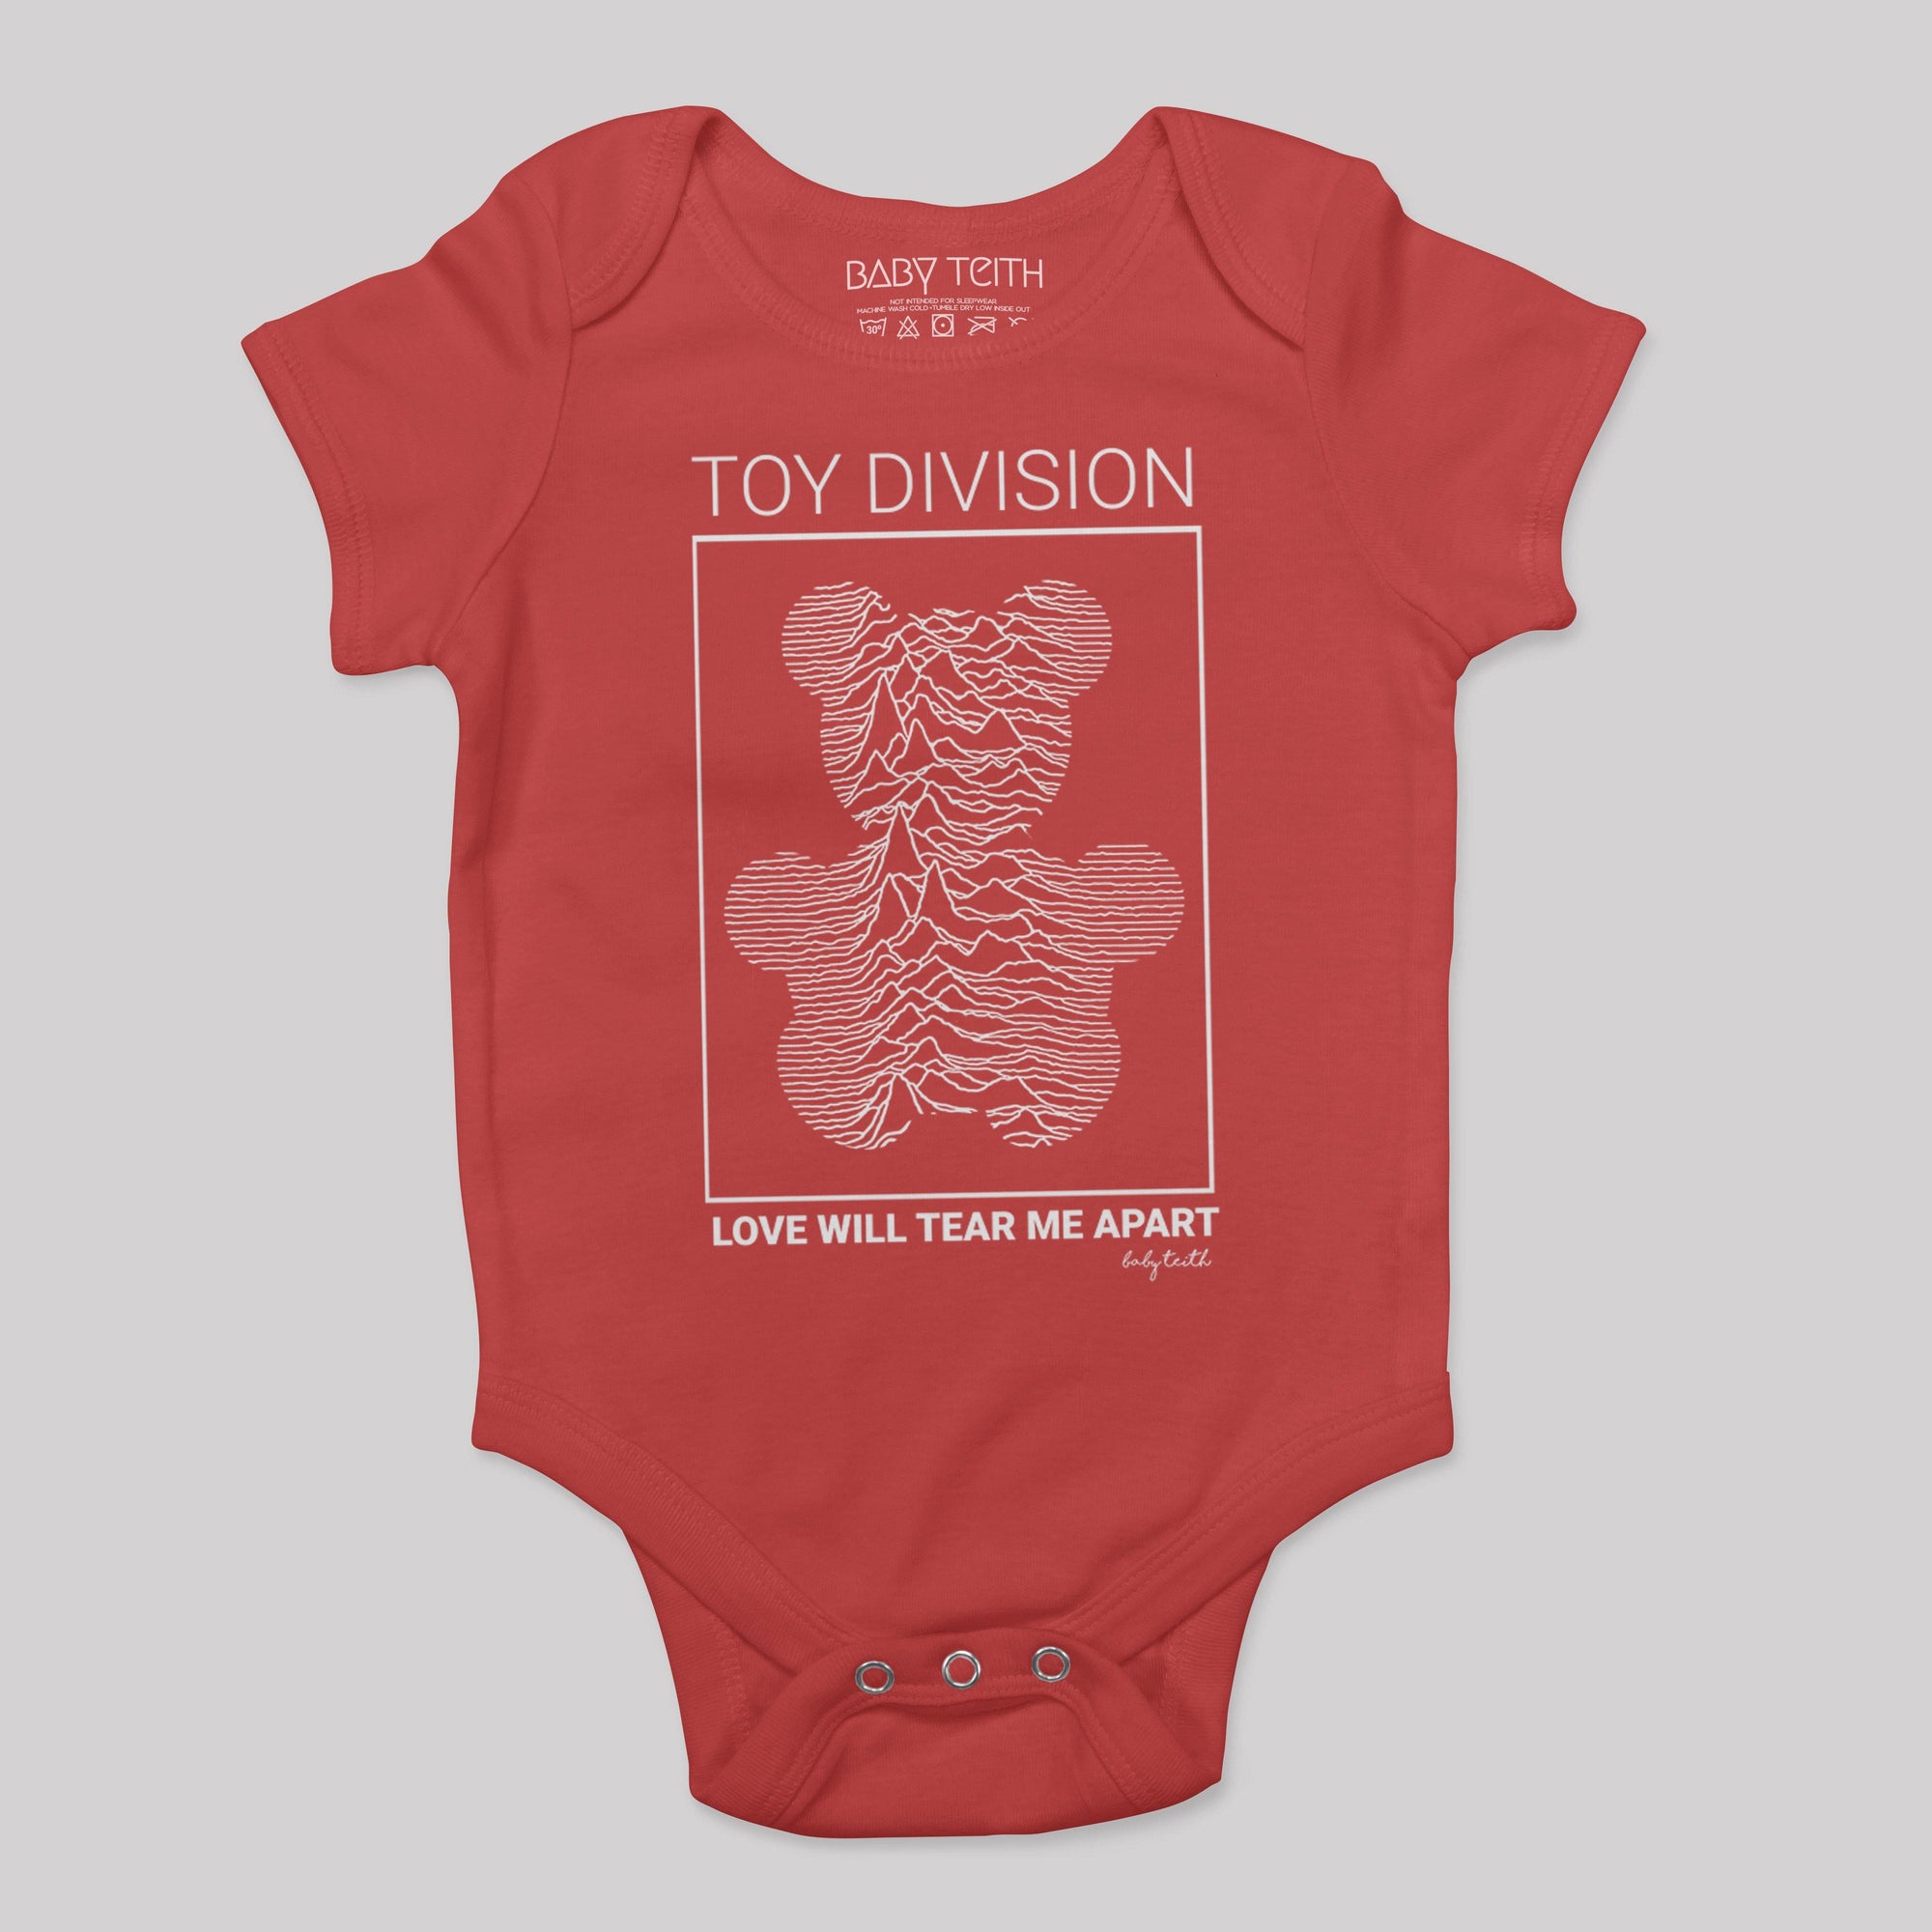 &quot;Toy Division&quot; Bodysuit for Babies - Baby Teith